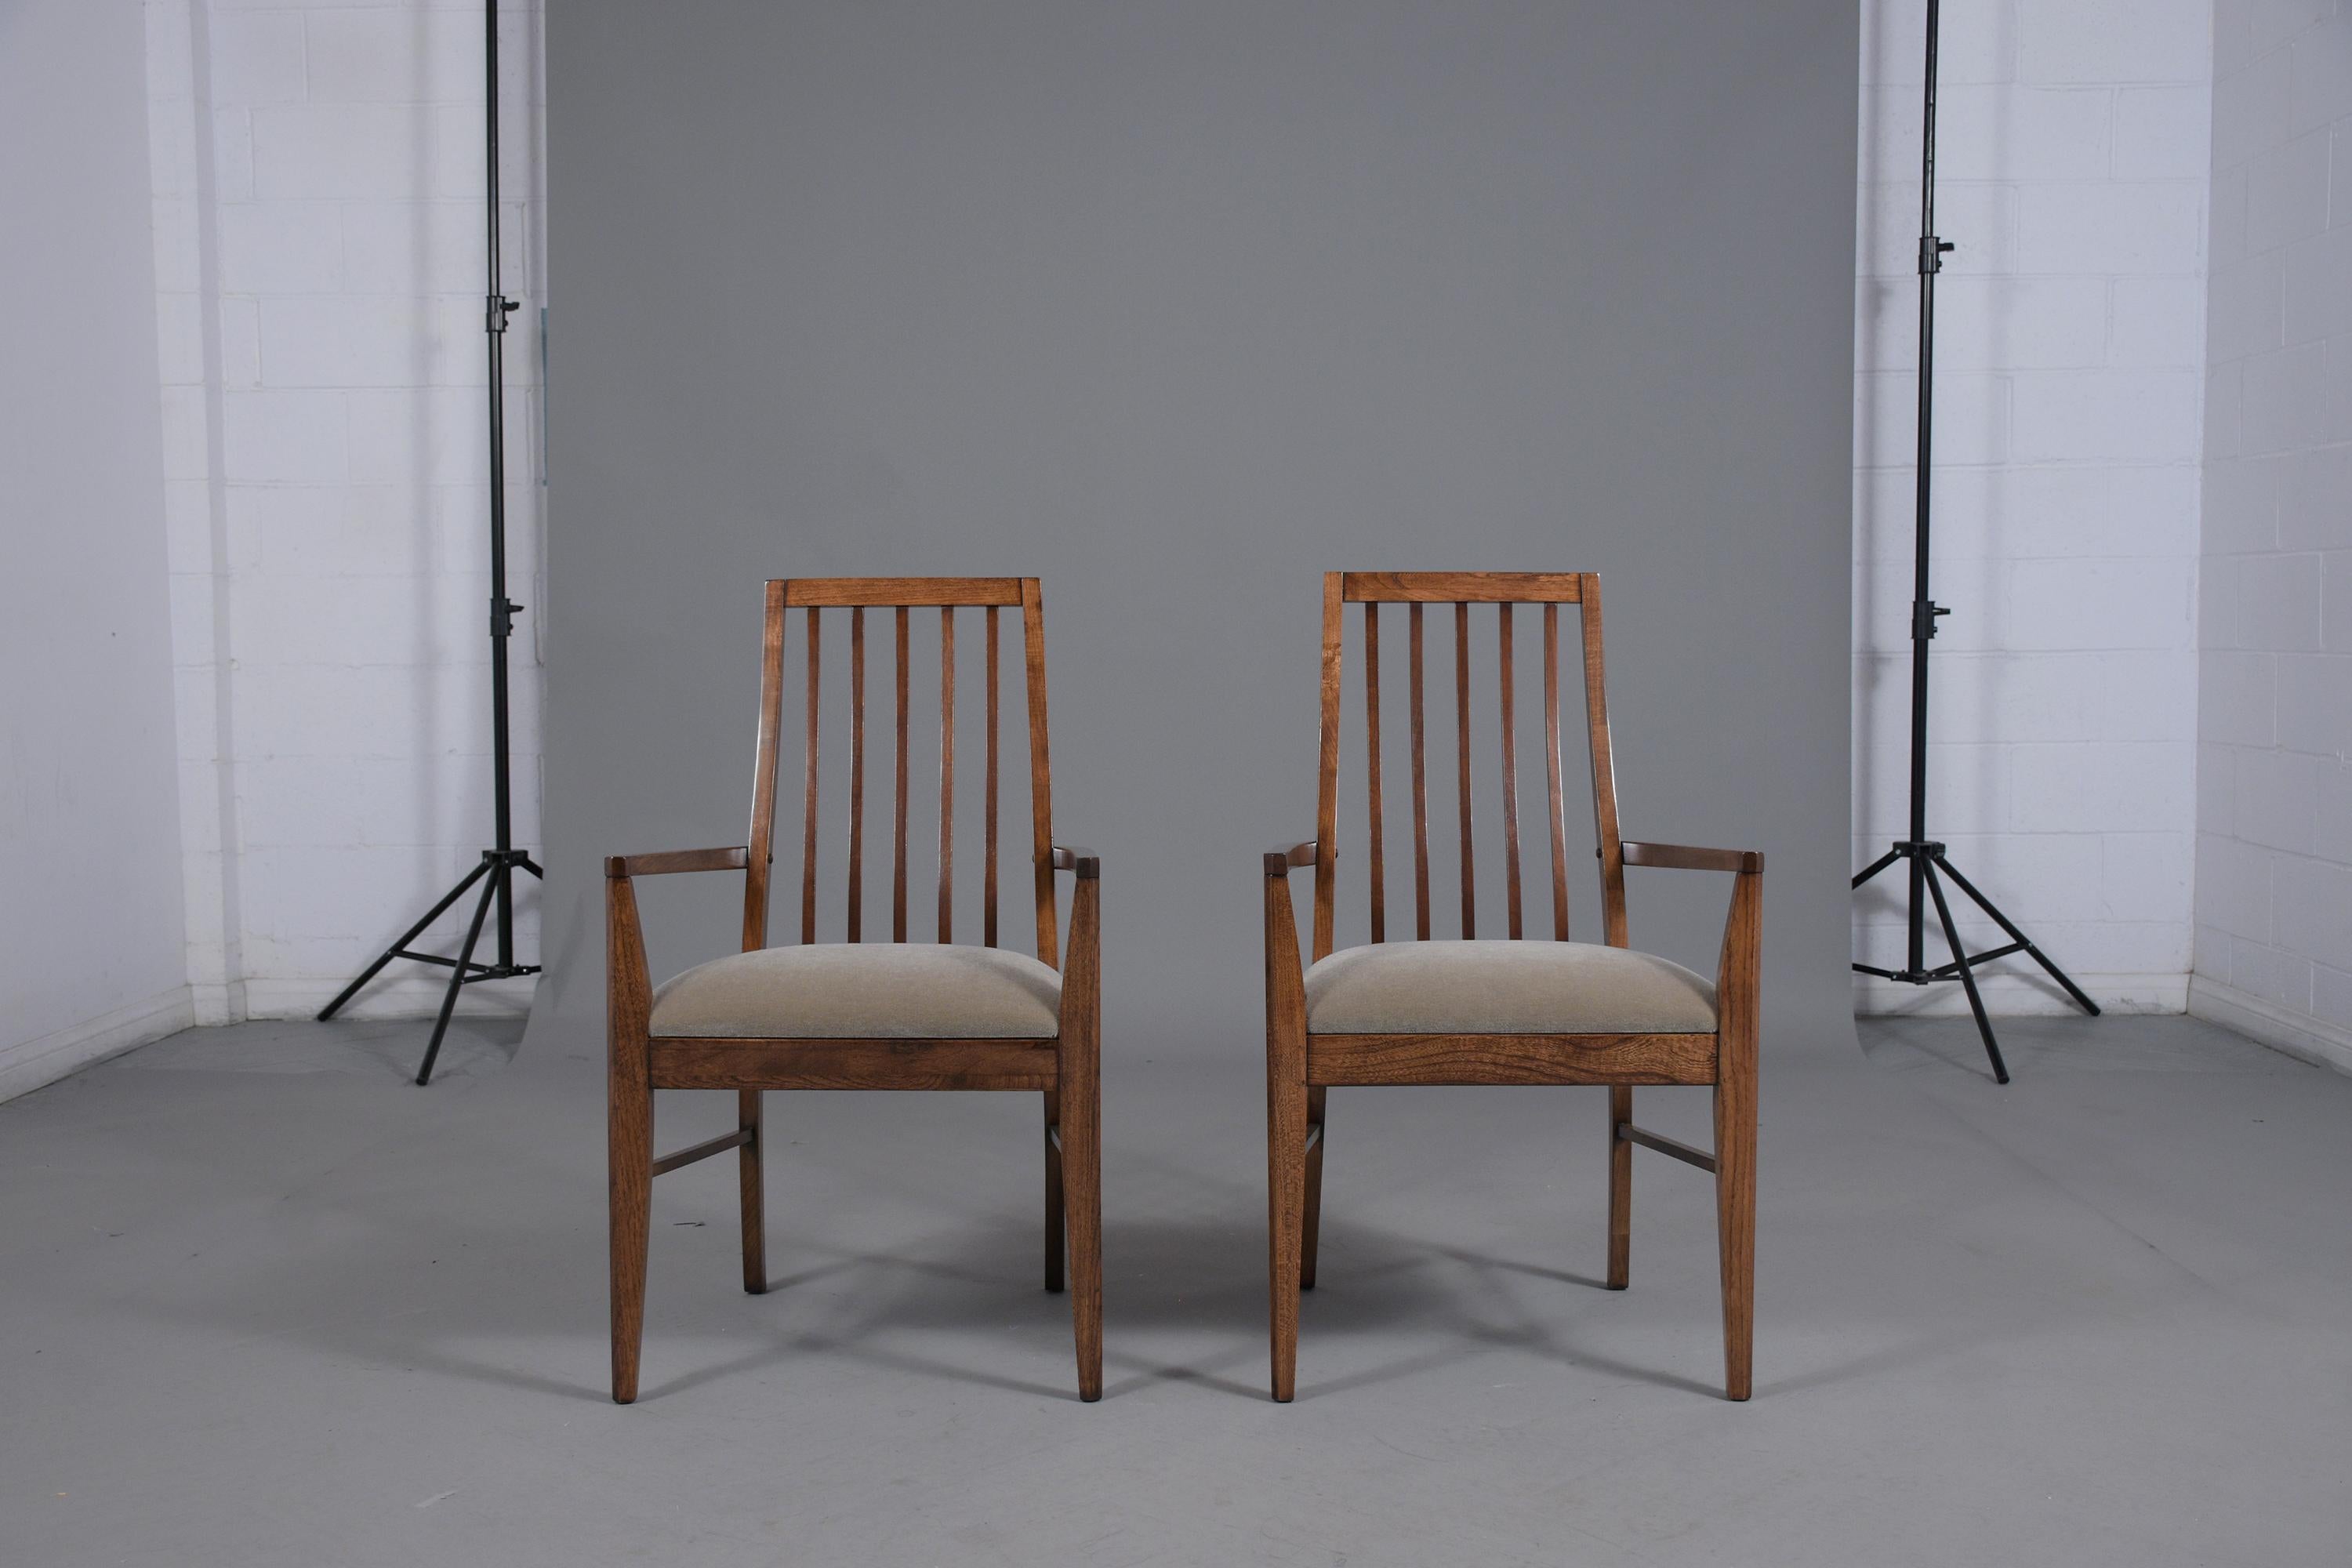 This vintage 1960s pair of mid-century modern armchairs are hand crafted out of walnut wood and have been restained with a newly lacquered finish and have been professionally restored by our expert craftsmen in house. The pair of lounge chairs have